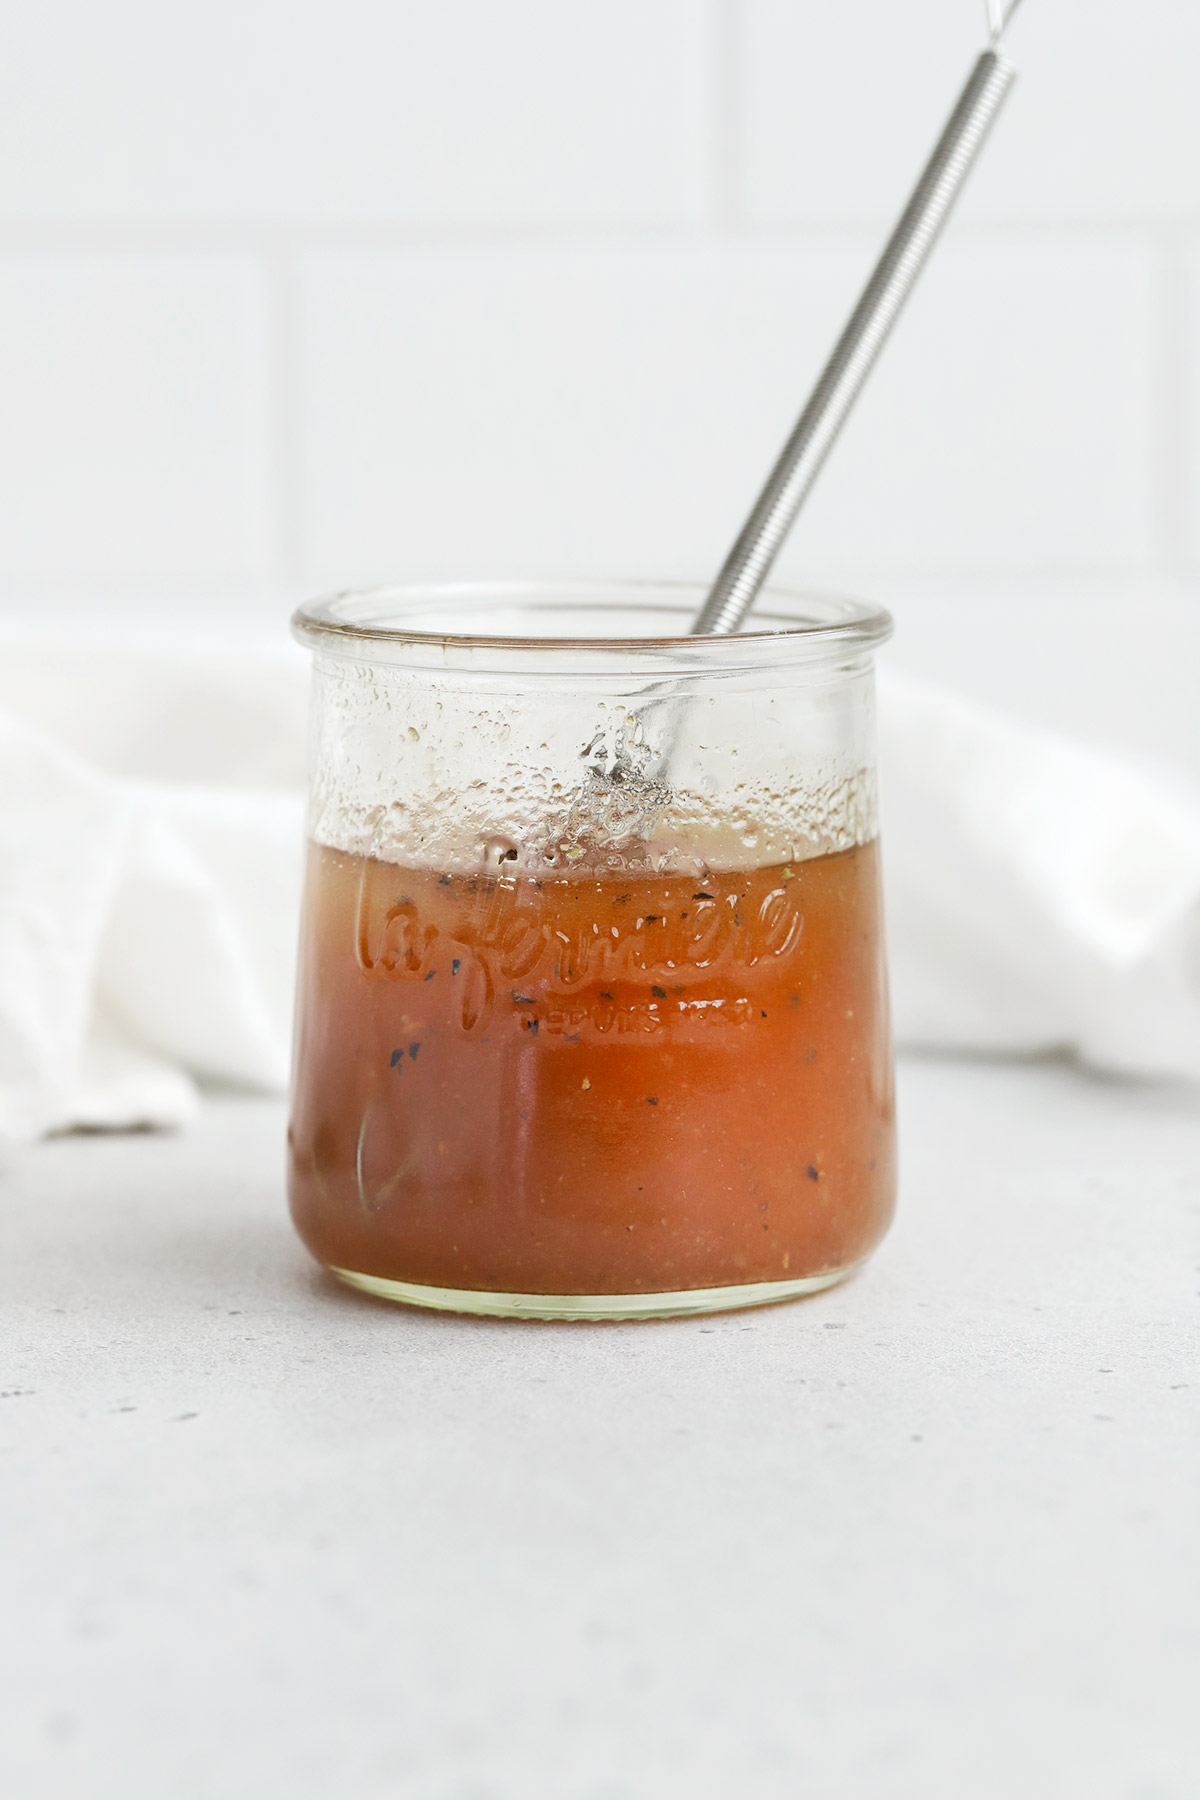 Front view of a jar of red wine vinegar dressing on a white background